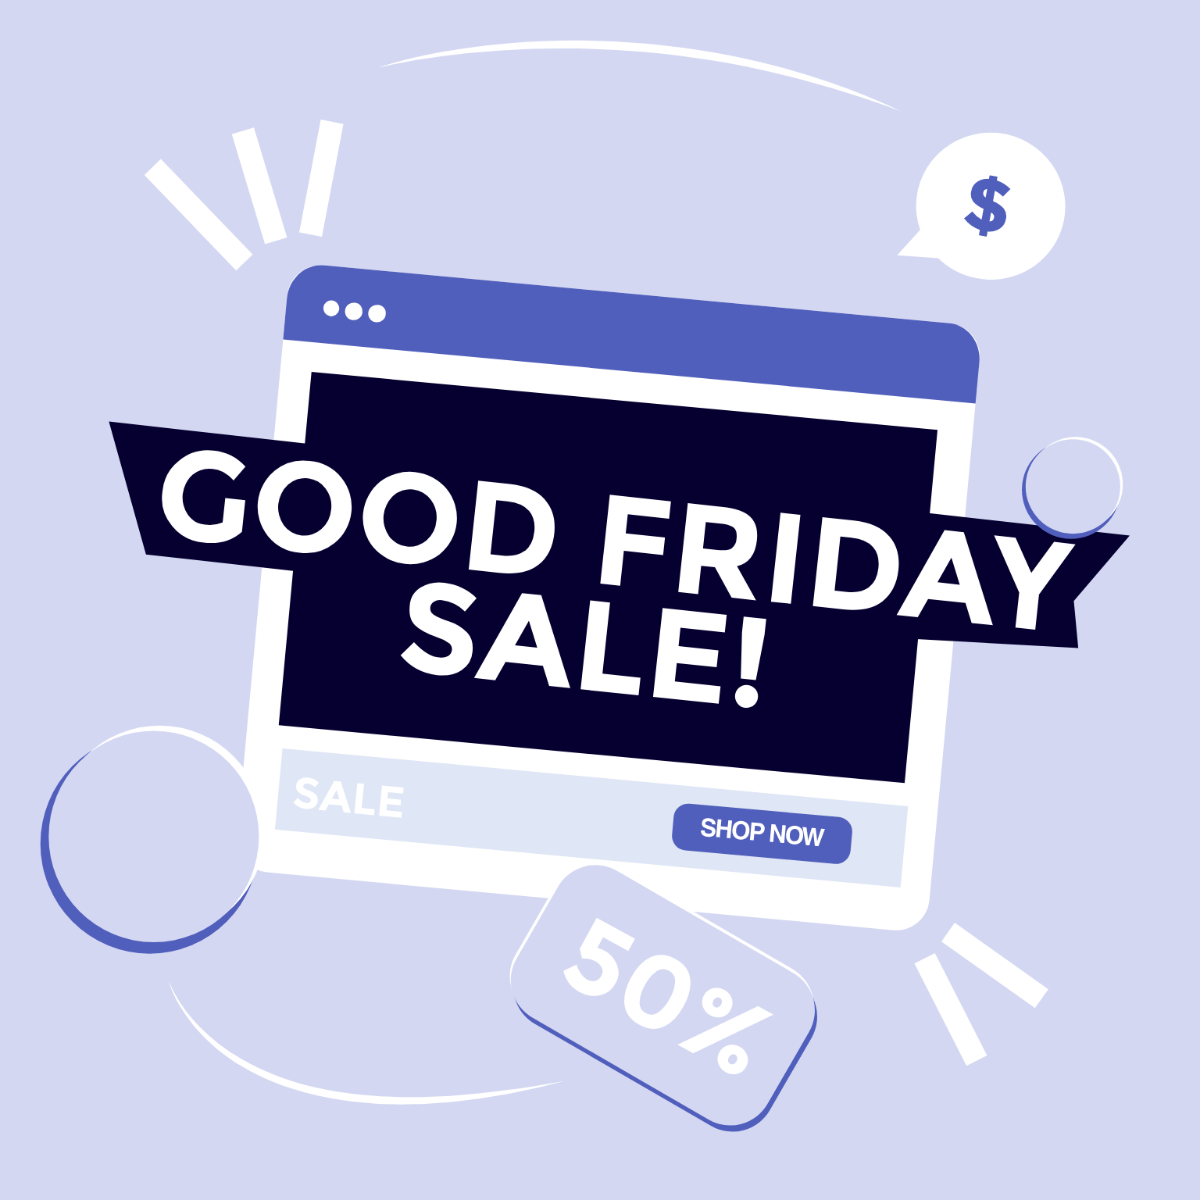 Free Good Friday Offer Vector Template